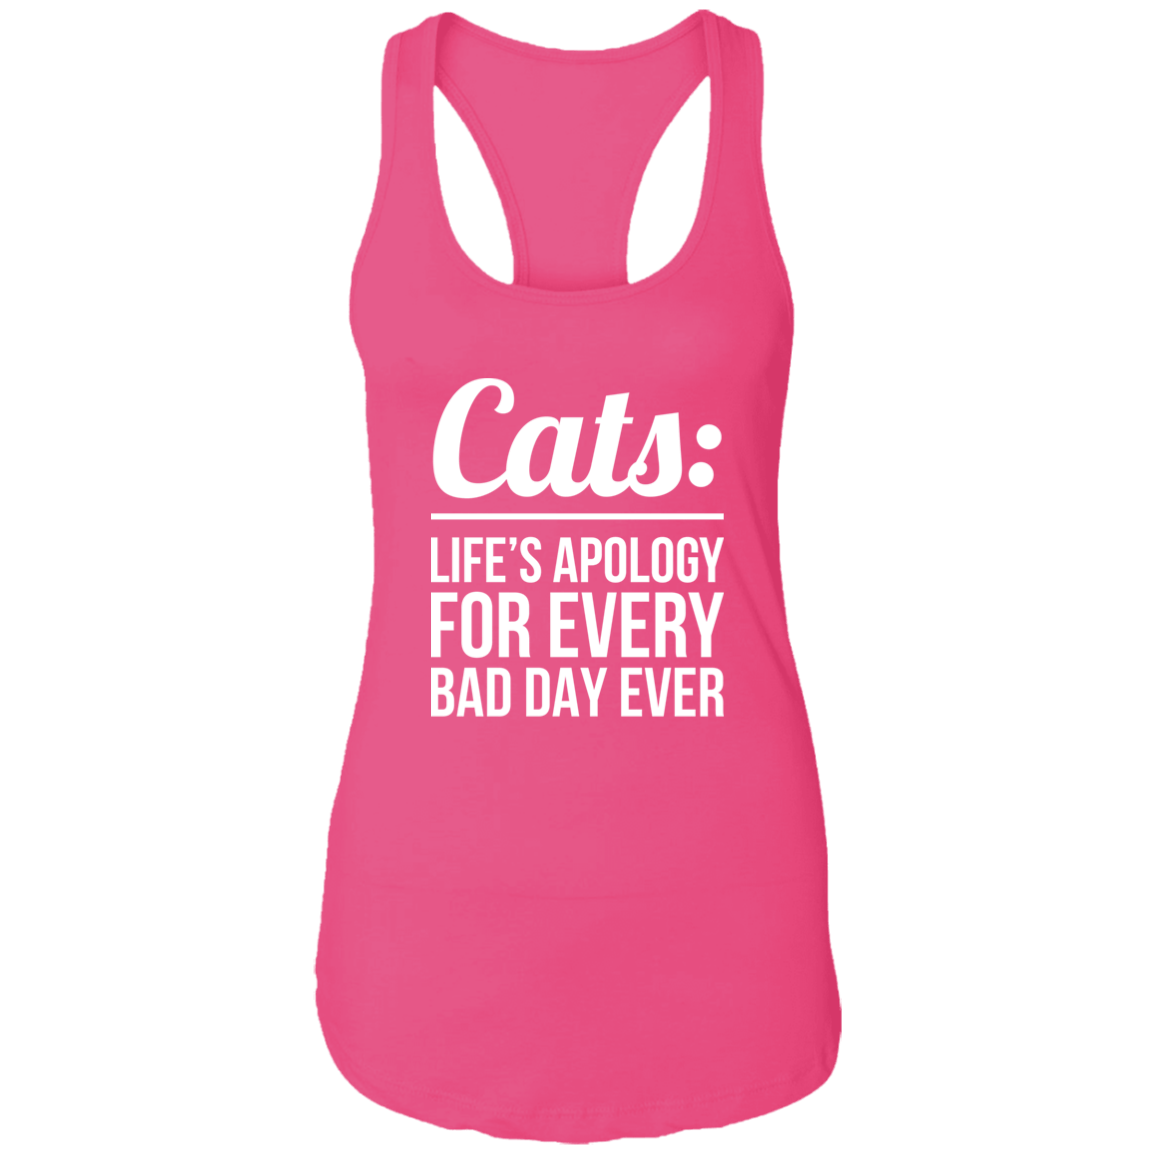 Cats Life's Apology - Ladies Racer Back Tank.